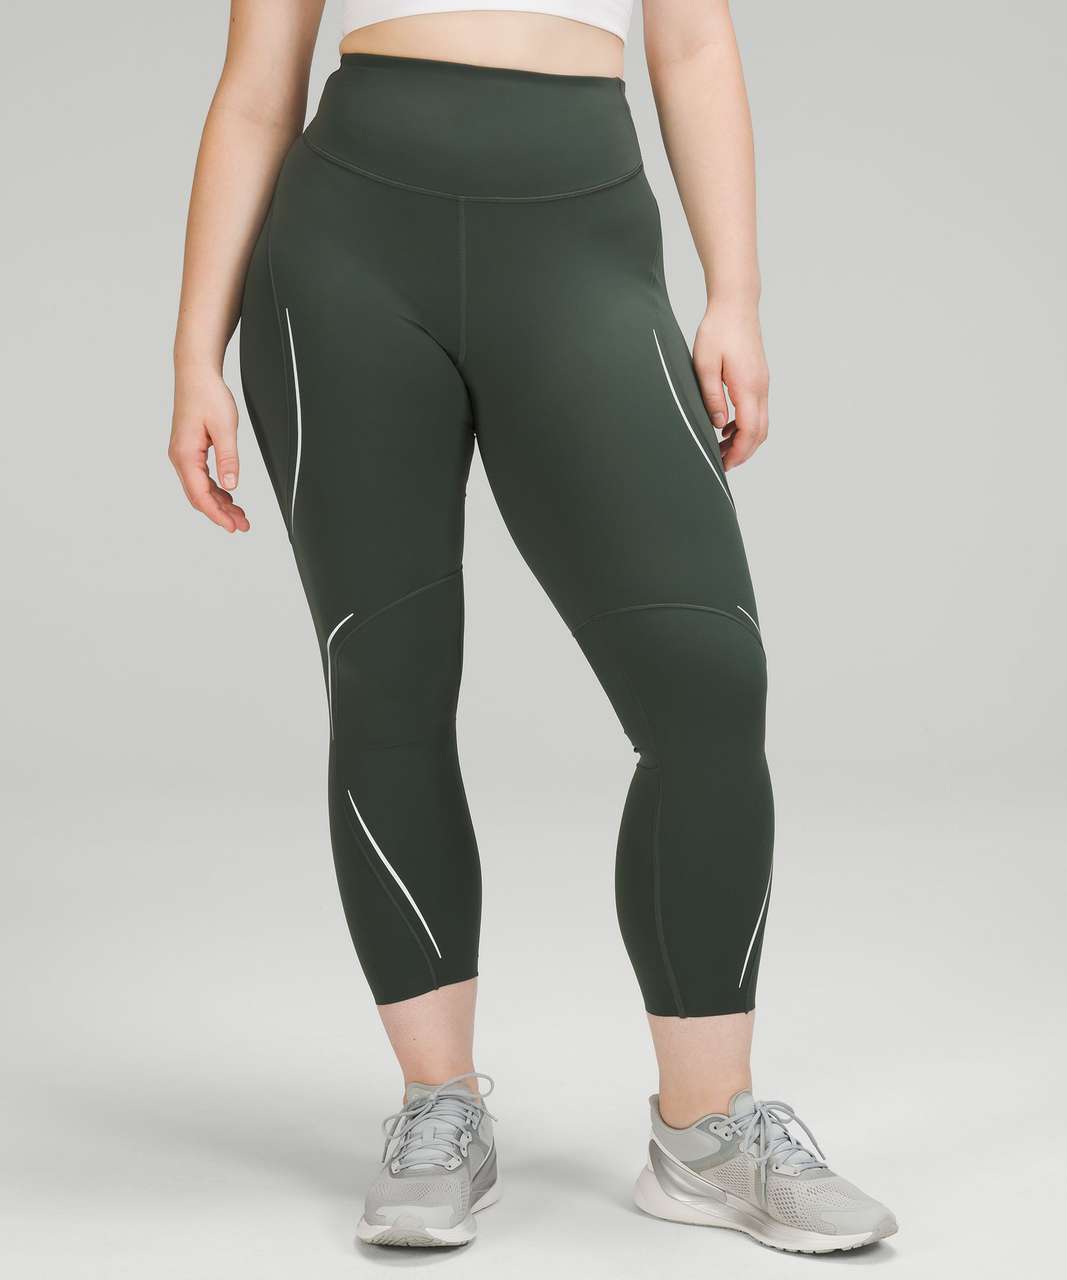 Lululemon Base Pace High Rise Running Tight 25 Misty Glade size 6 NWT  Green - $75 (23% Off Retail) New With Tags - From MyArt